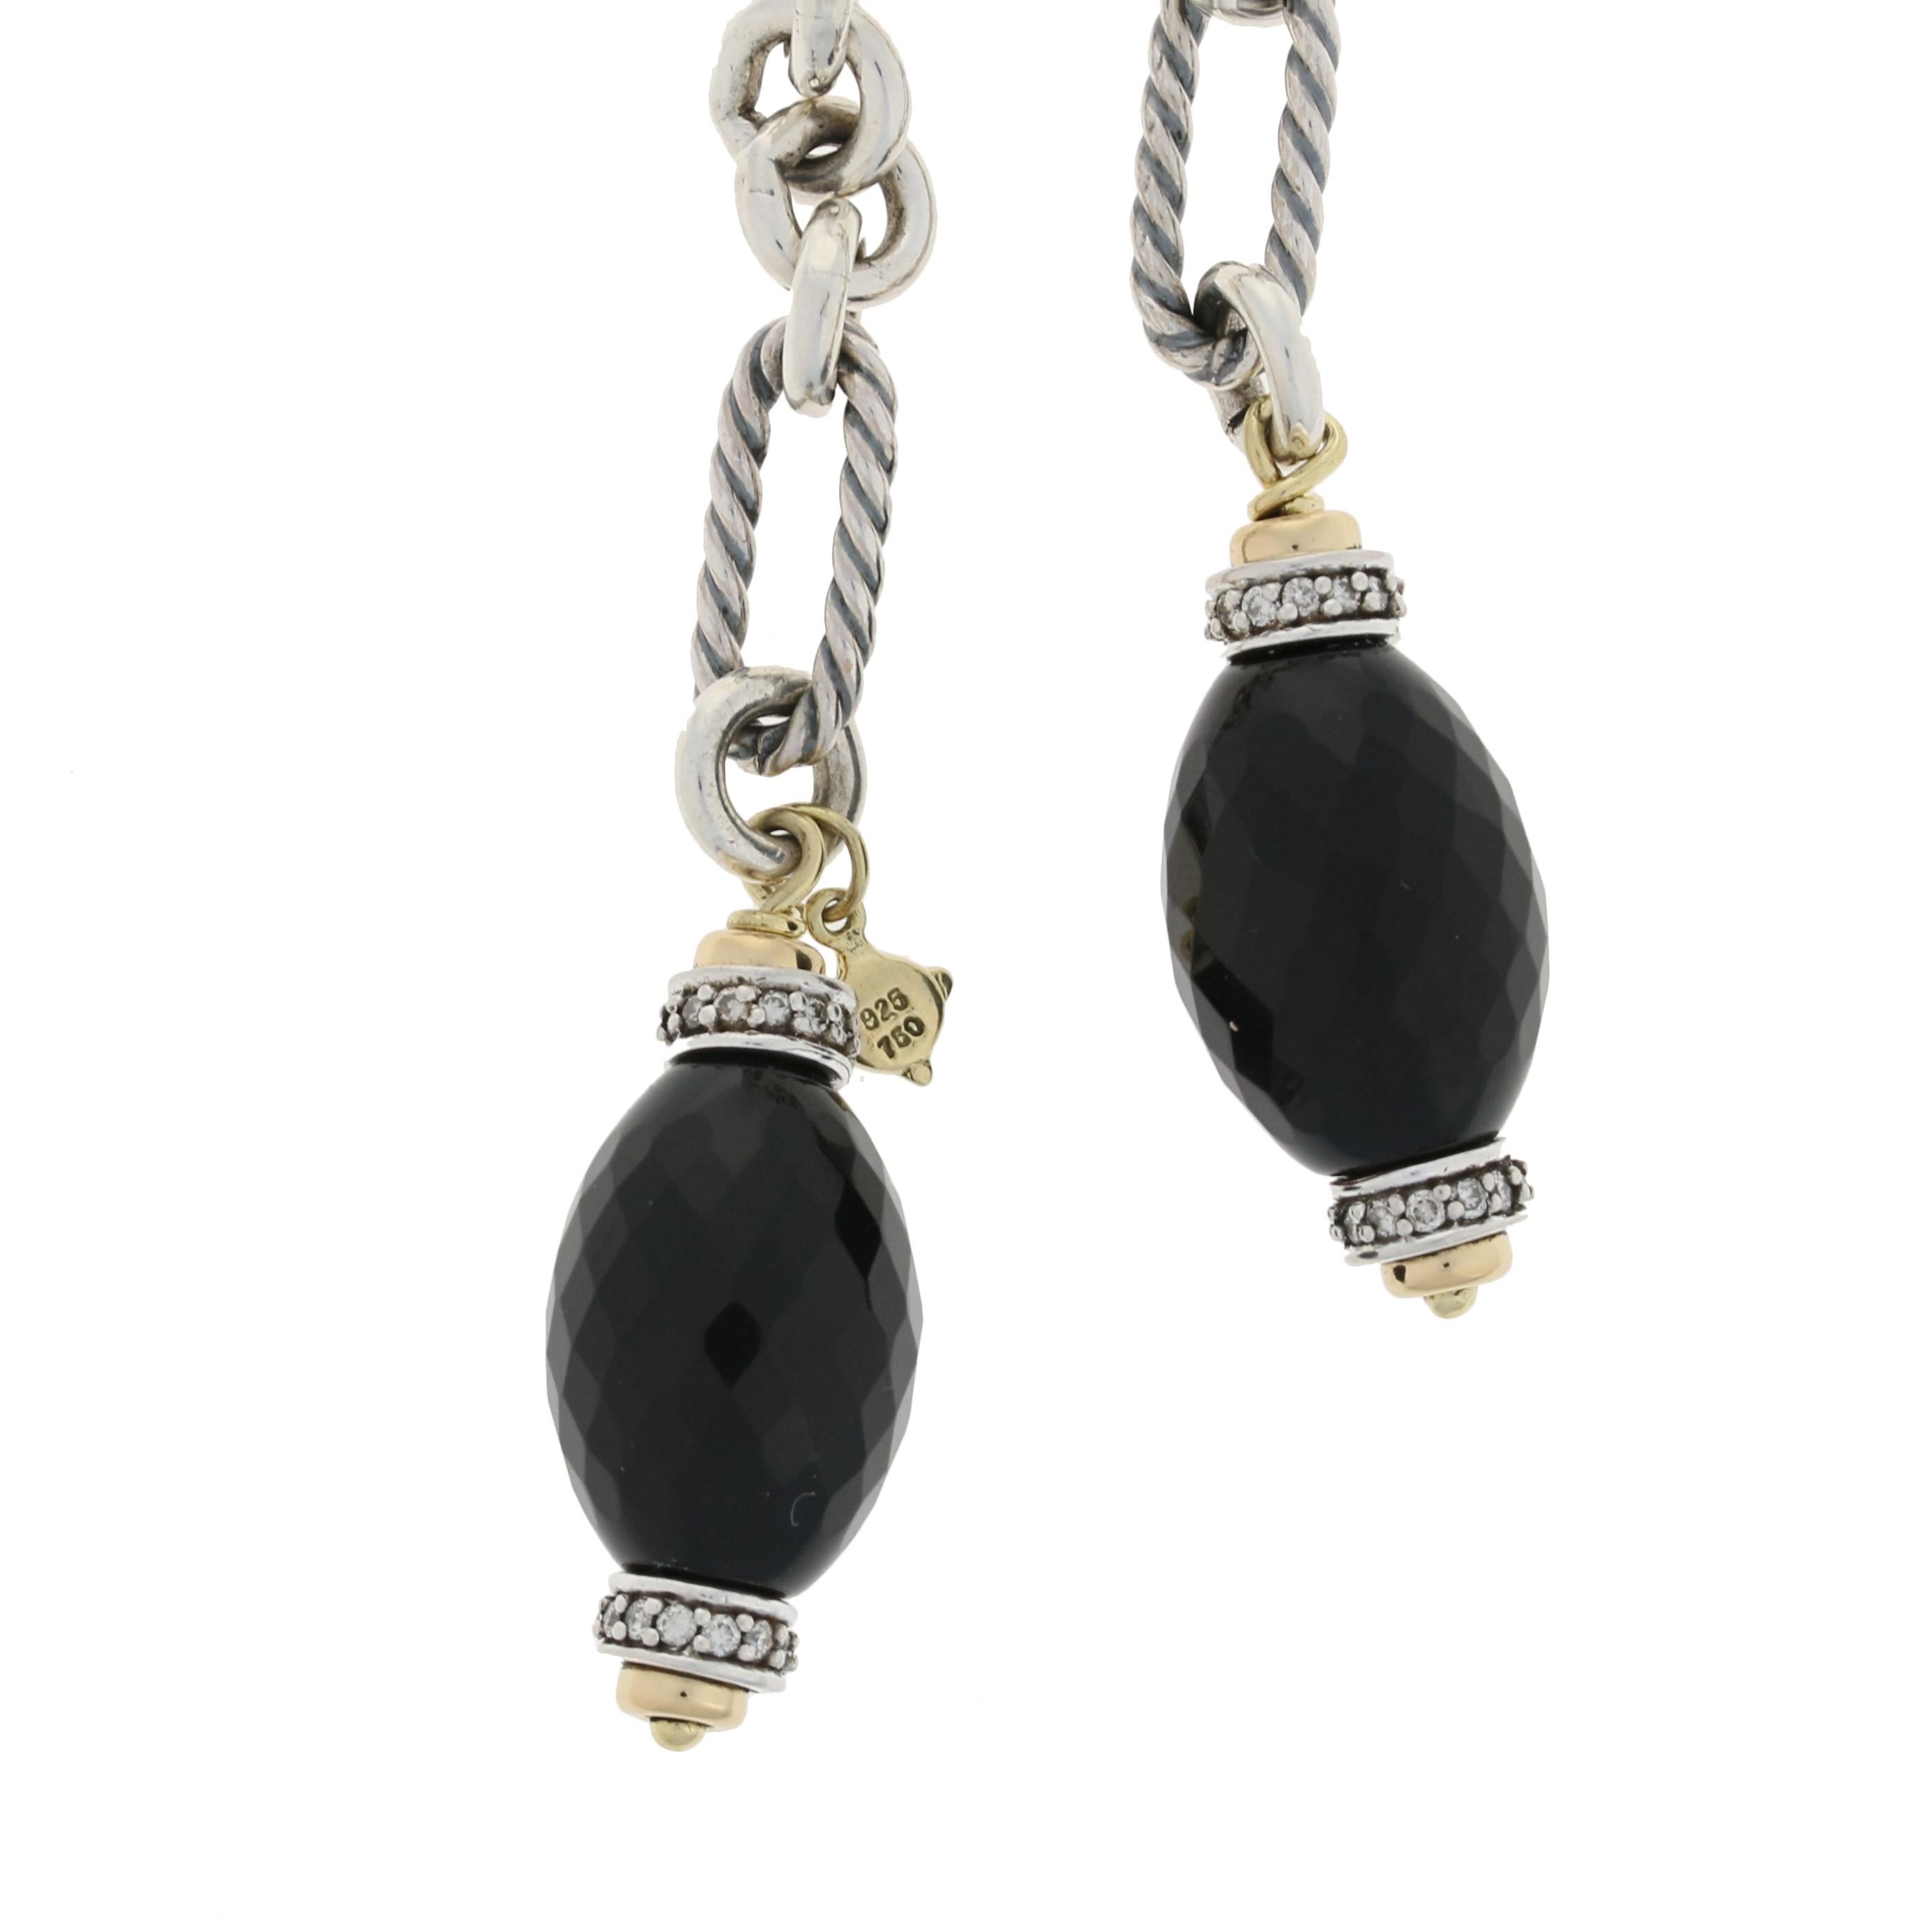 Originally retailing for $1850, this designer necklace is being offered here for a much more wallet-friendly price!

Brand: David Yurman 
Metal Content: Guaranteed Sterling Silver & 18k Gold as stamped

Stone Information: 
Genuine Onyx
Color: Black
